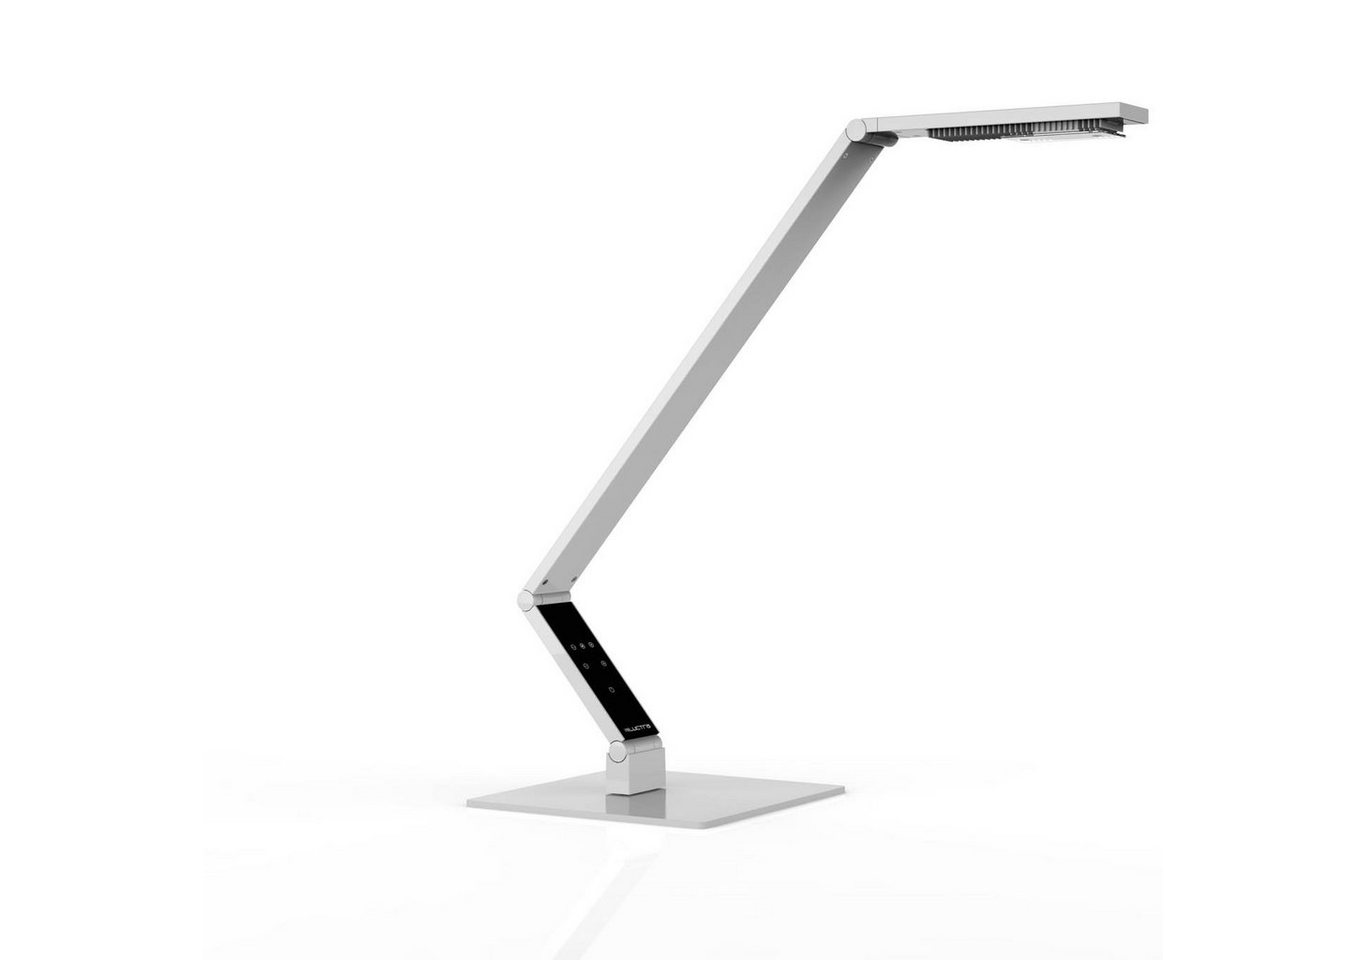 LUCTRA Tischleuchte TABLE LINEAR BASE, LUCTRA Table Linear Base Schreibtischlampe LED Dimmbar, schwarz, LED S von LUCTRA